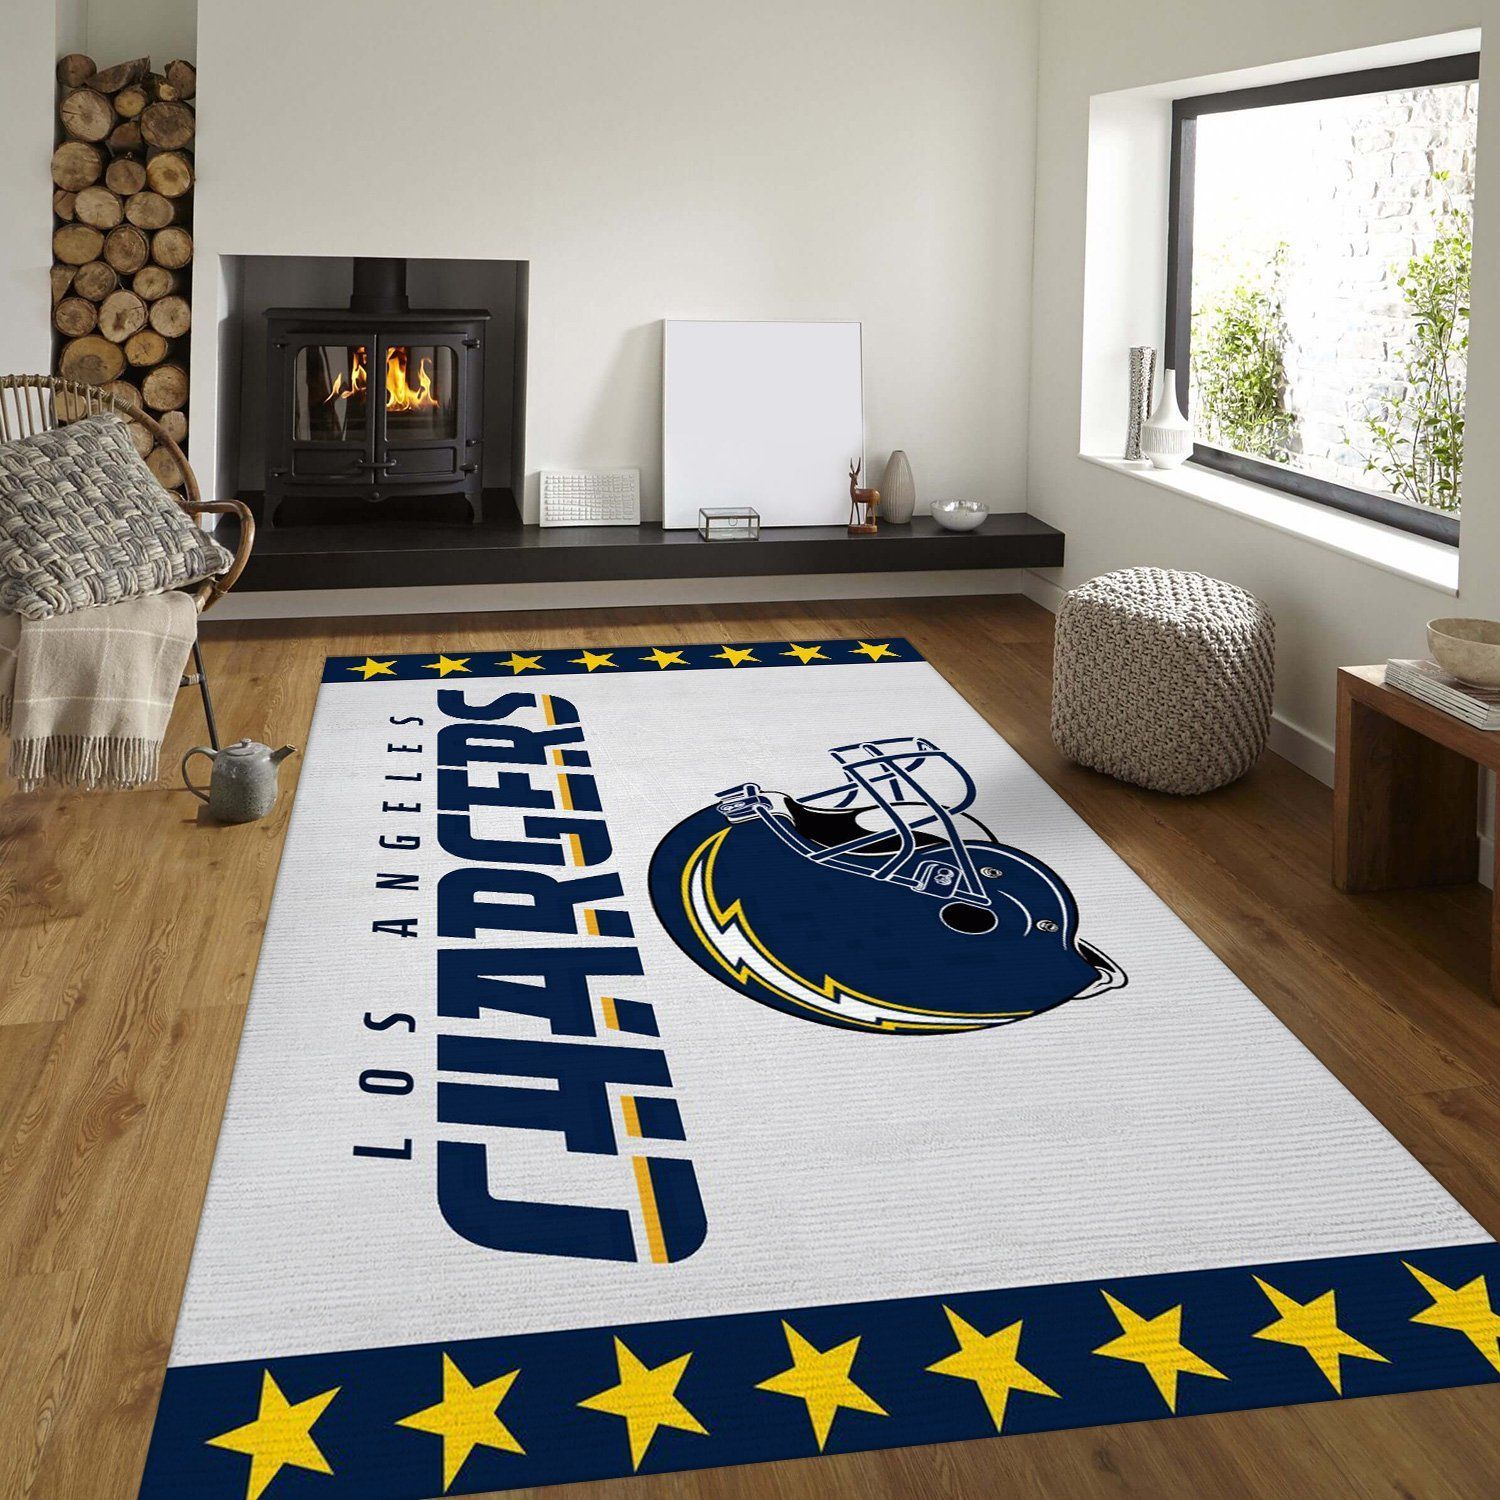 Los Angeles Chargers Nfl Logo Area Rug For Gift Living Room Rug Home Decor Floor Decor - Indoor Outdoor Rugs 3